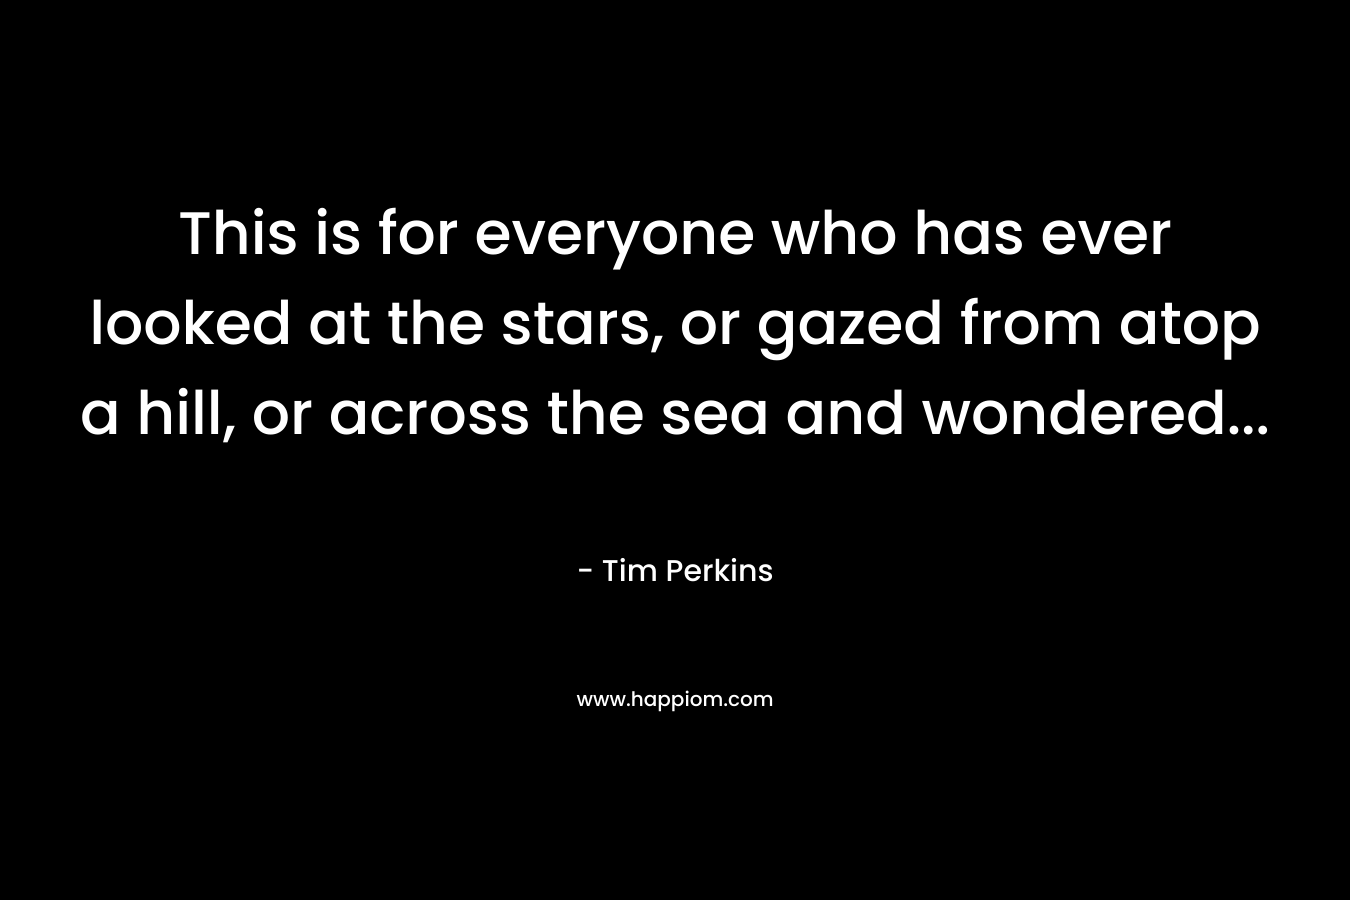 This is for everyone who has ever looked at the stars, or gazed from atop a hill, or across the sea and wondered… – Tim Perkins